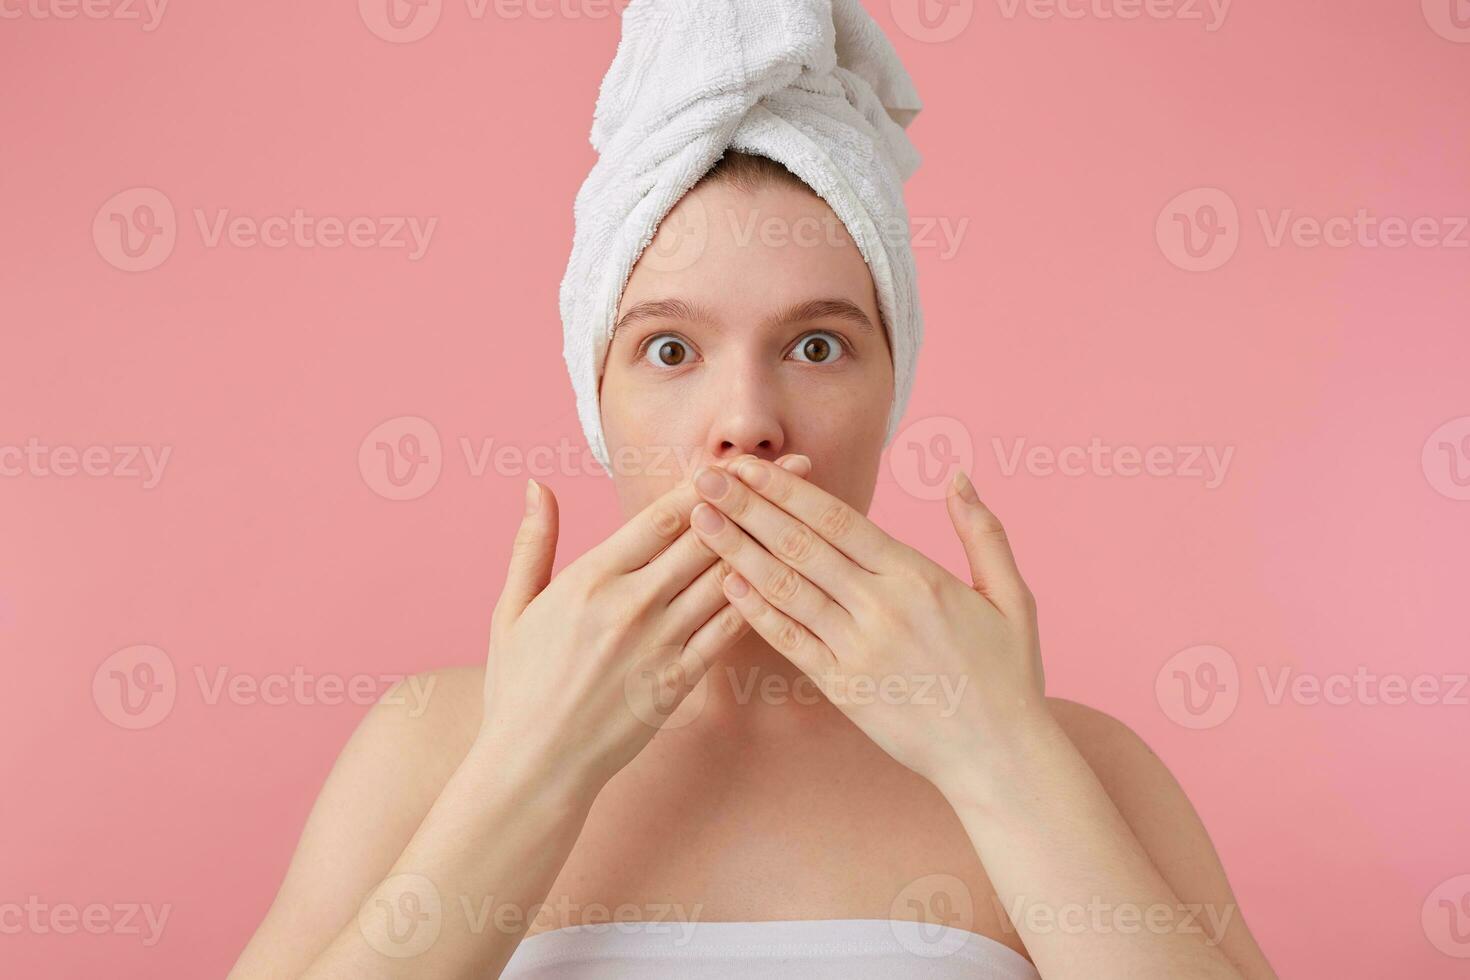 Photo of wondered young woman after shower with a towel on her head, covering mouth with hands, stands over pink background.